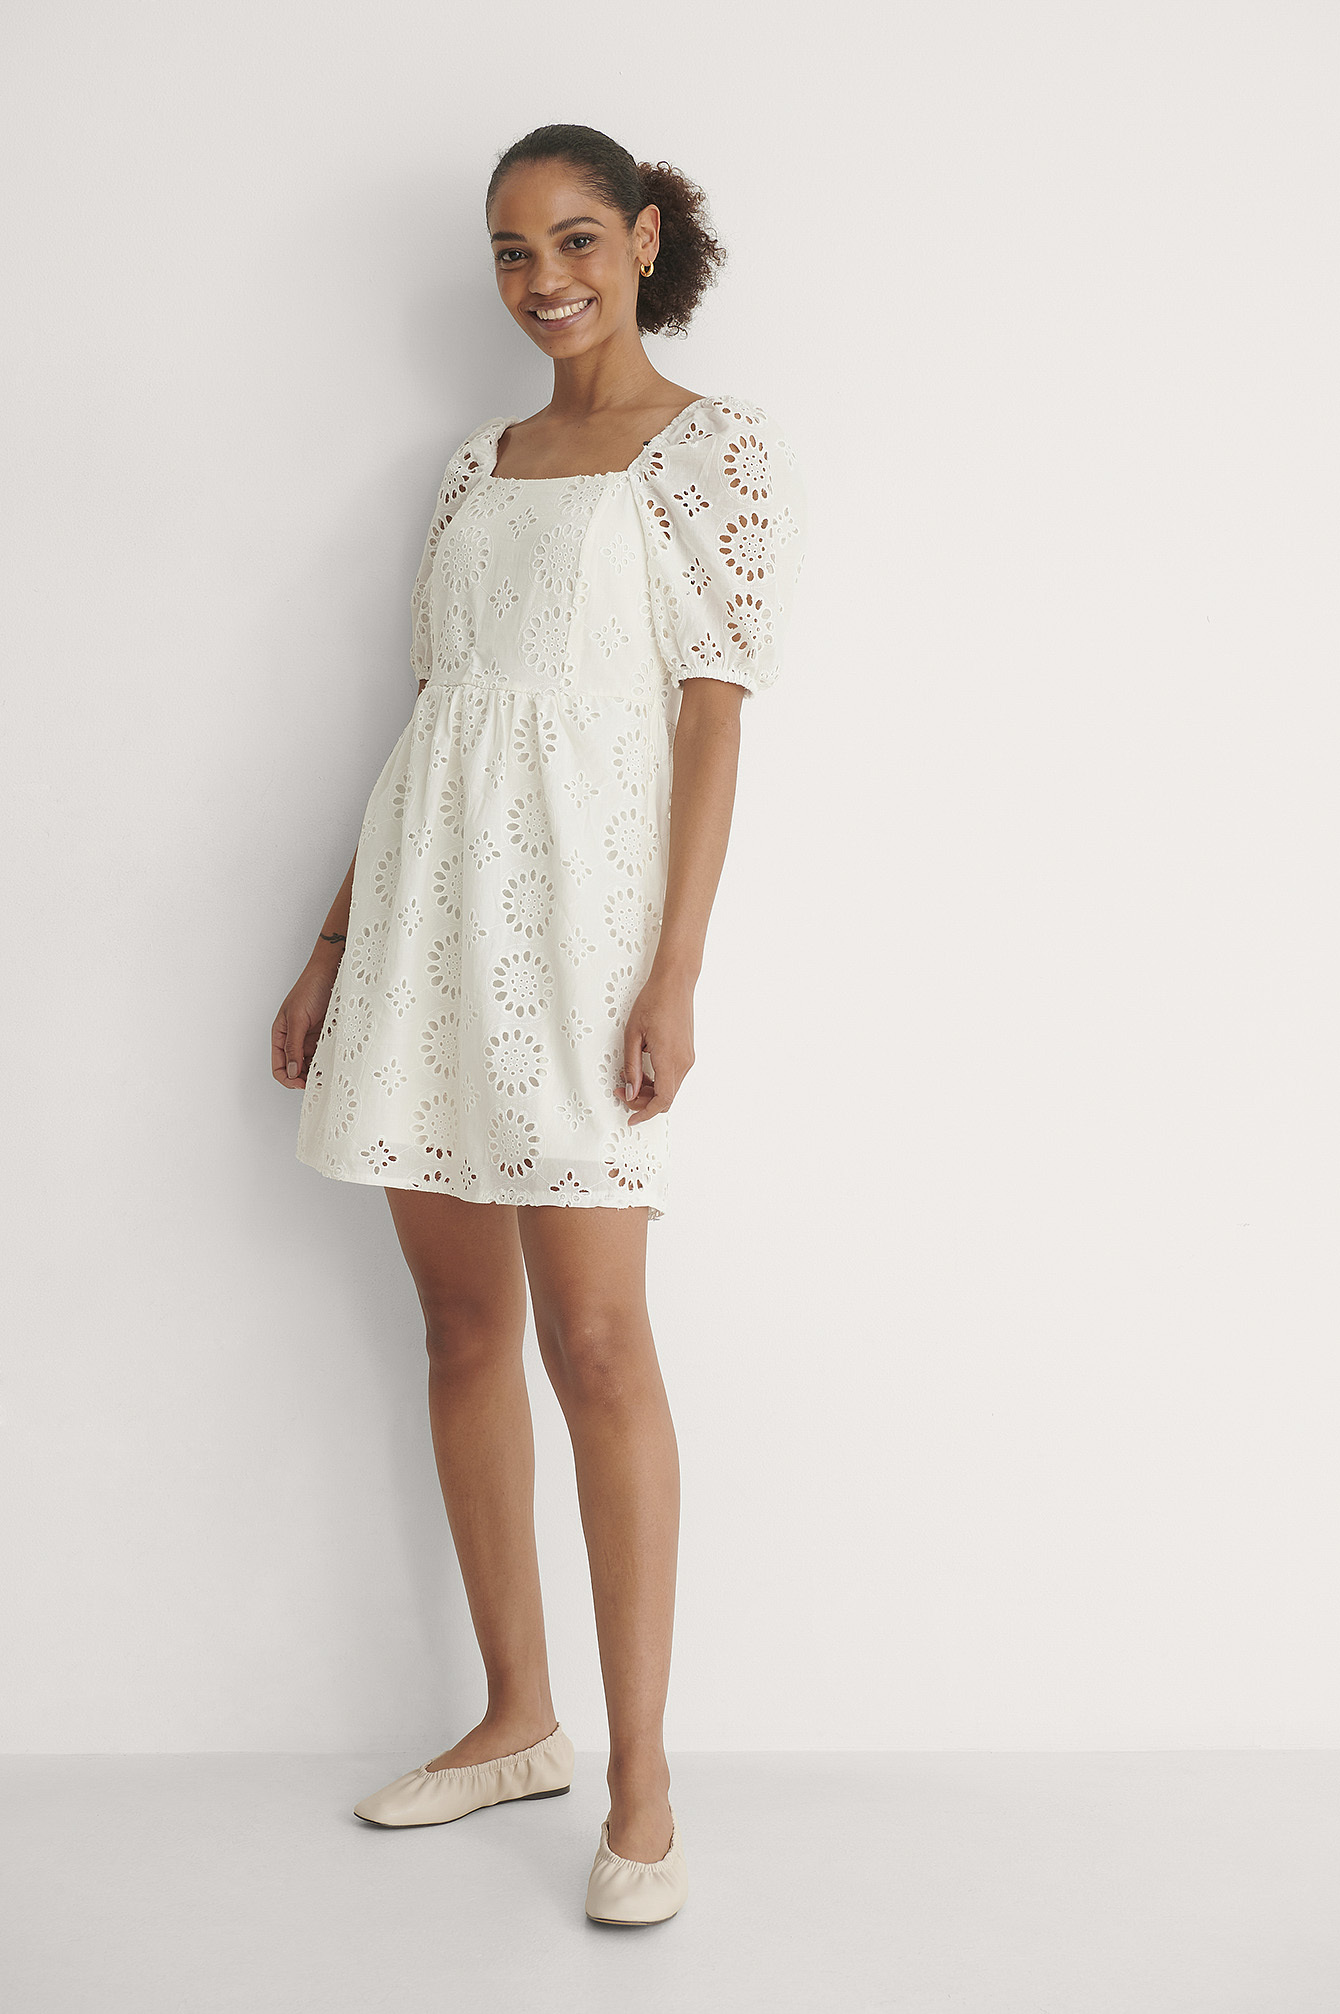 Square Neck Embroided Dress Outfit